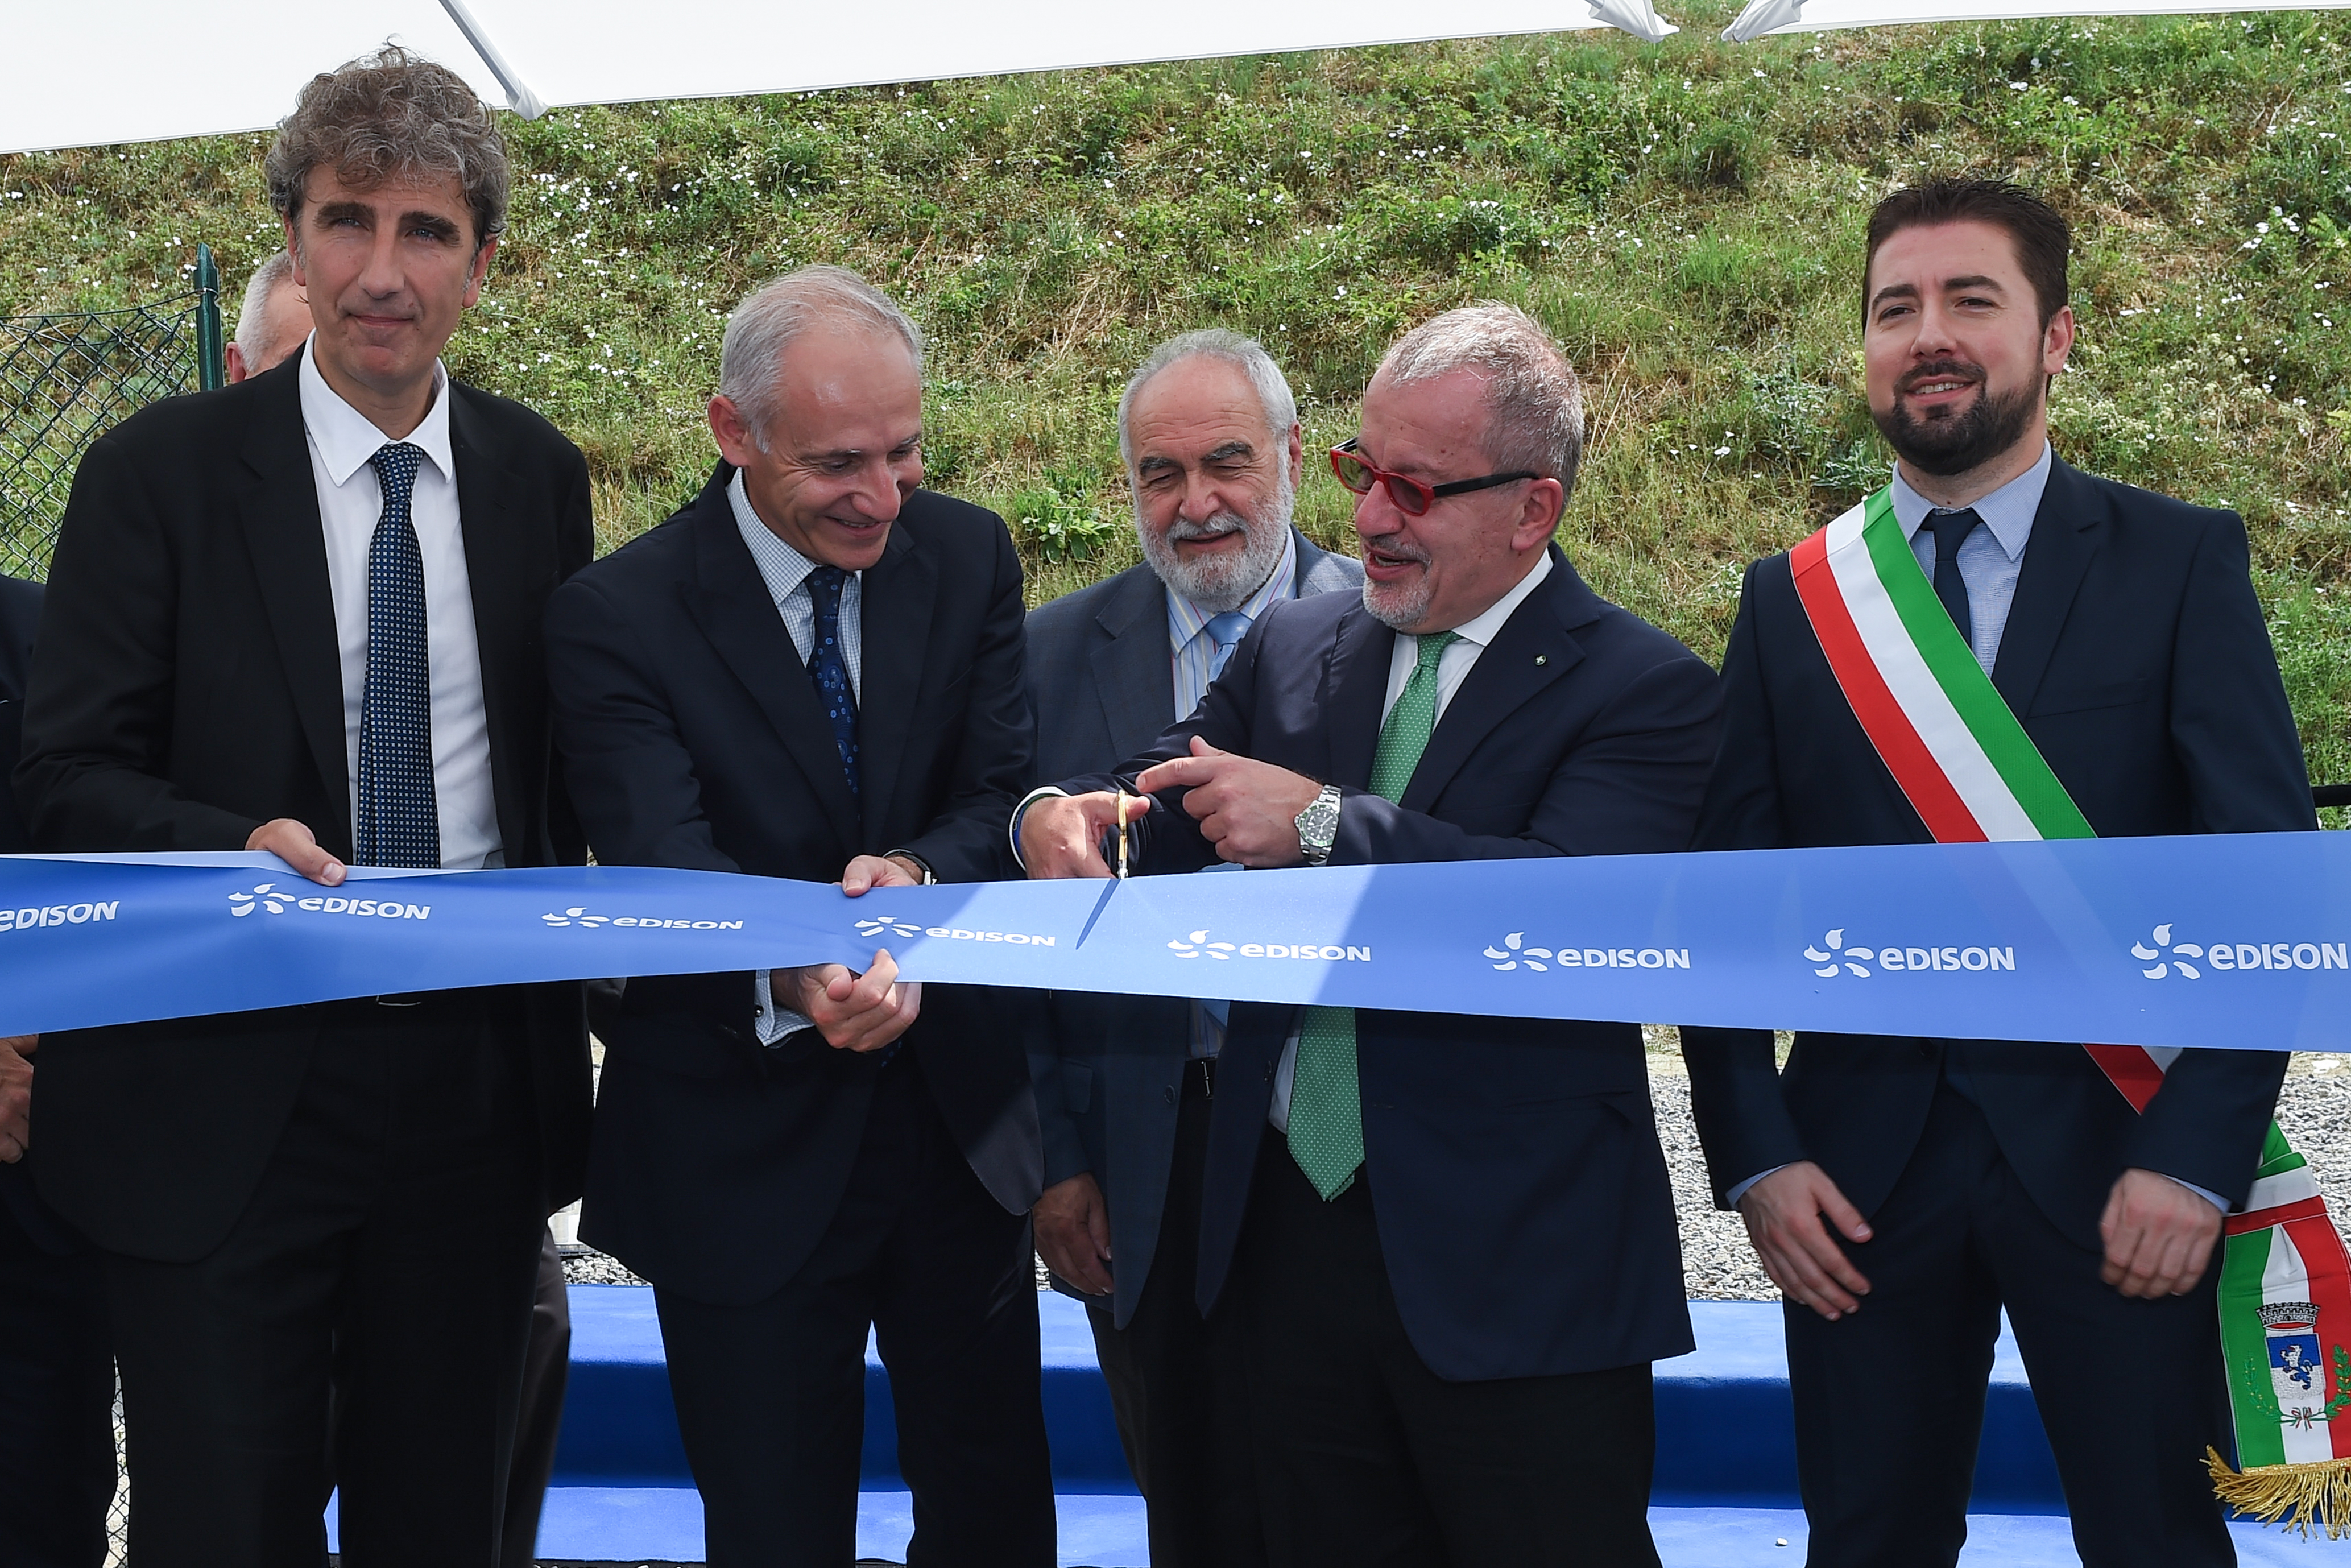 EDISON COMMISSIONS ITS NEW PIZZIGHETTONE HYDROELECTRIC PLANT: RENEWABLE ENERGY FOR 6,000 HOUSEHOLDS